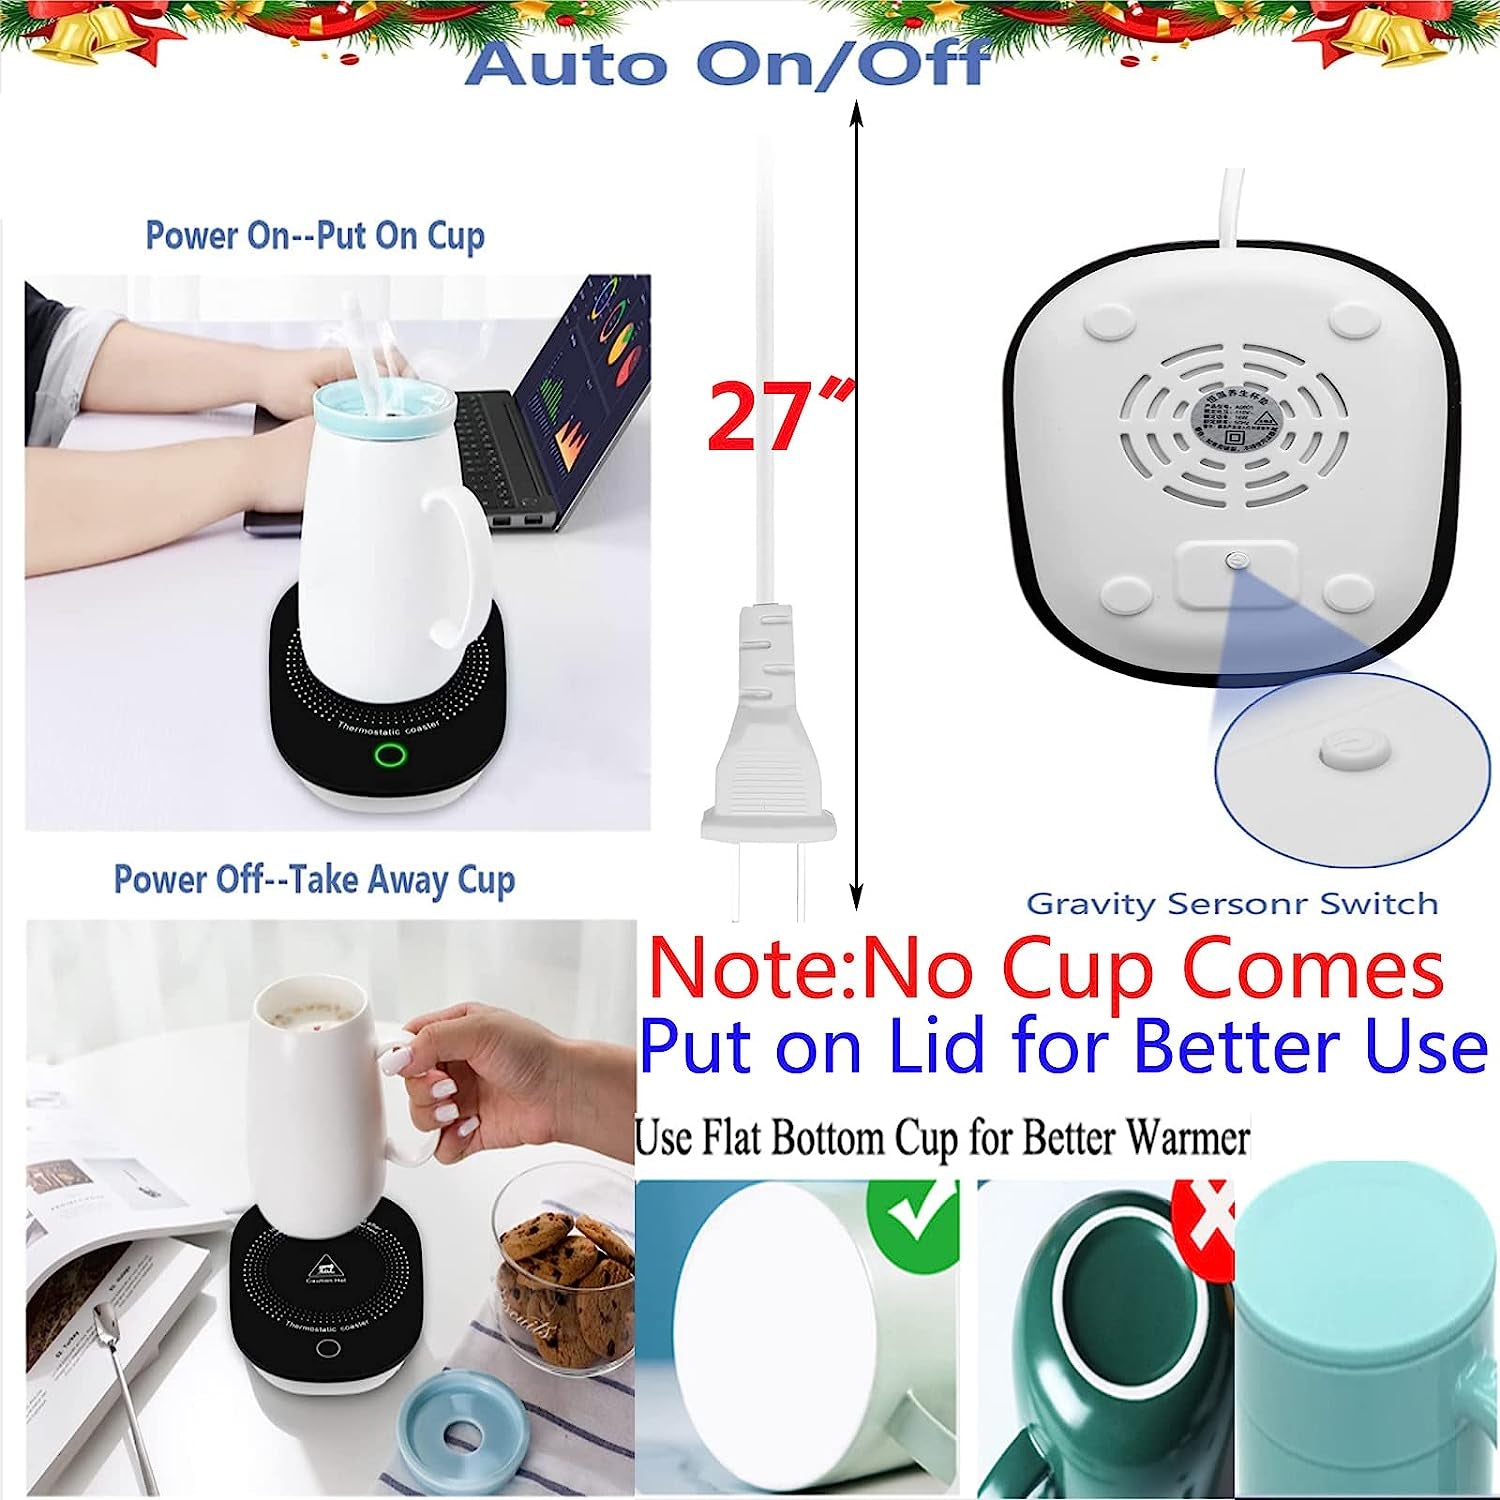 Coffee Cup Warmer for Desk with Auto Shut Off, Coffee Mug Warmer for Desk Office Home